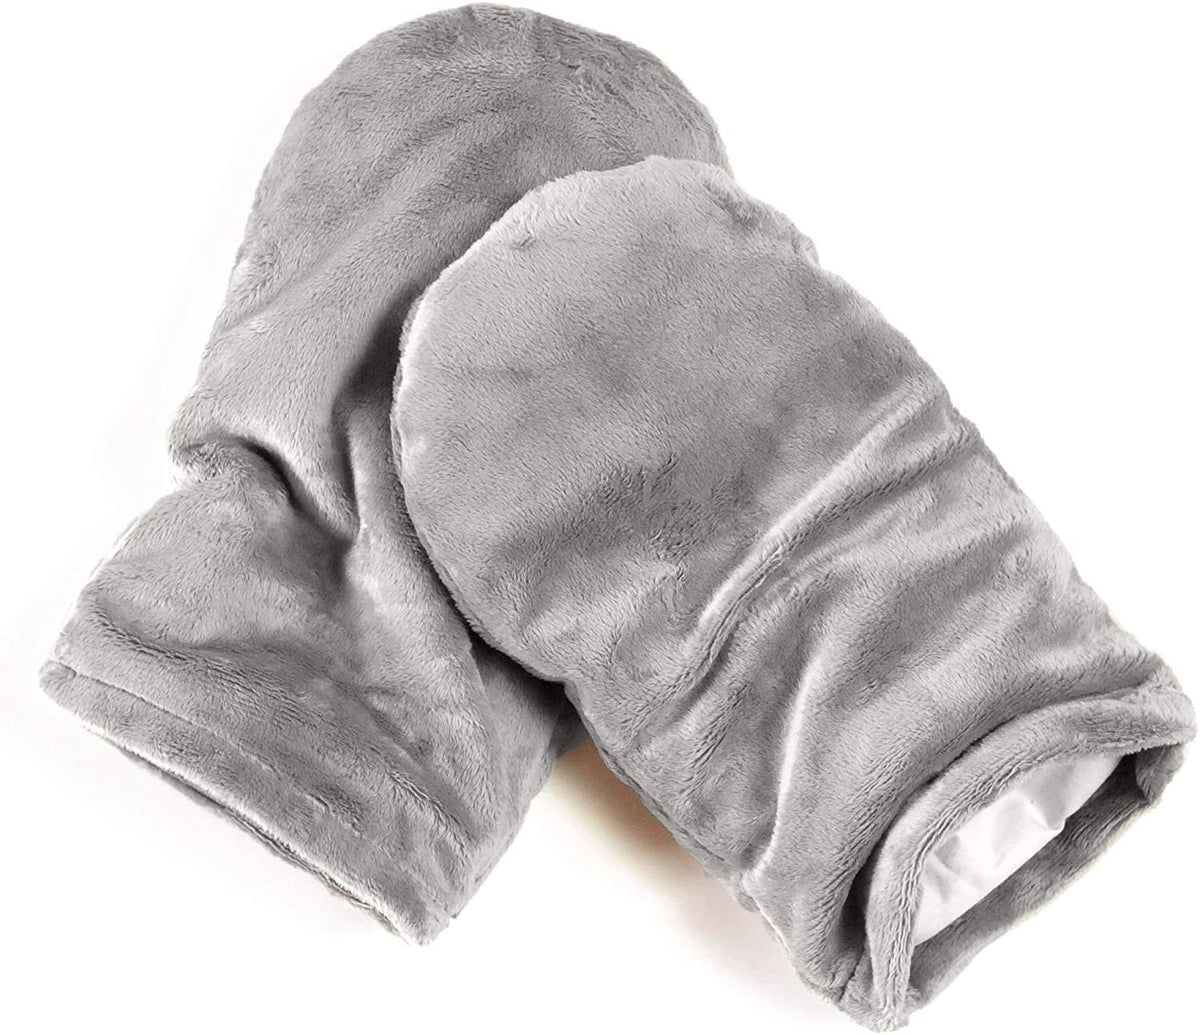 Heated Microwavable Mitts - Herbal Hot/Cold Deep Penetrating Herbal Aromatherapy Therapy Mittens with Flaxseed and Herbs - Trigger Finger, Inflammation, Carpal Tunnel